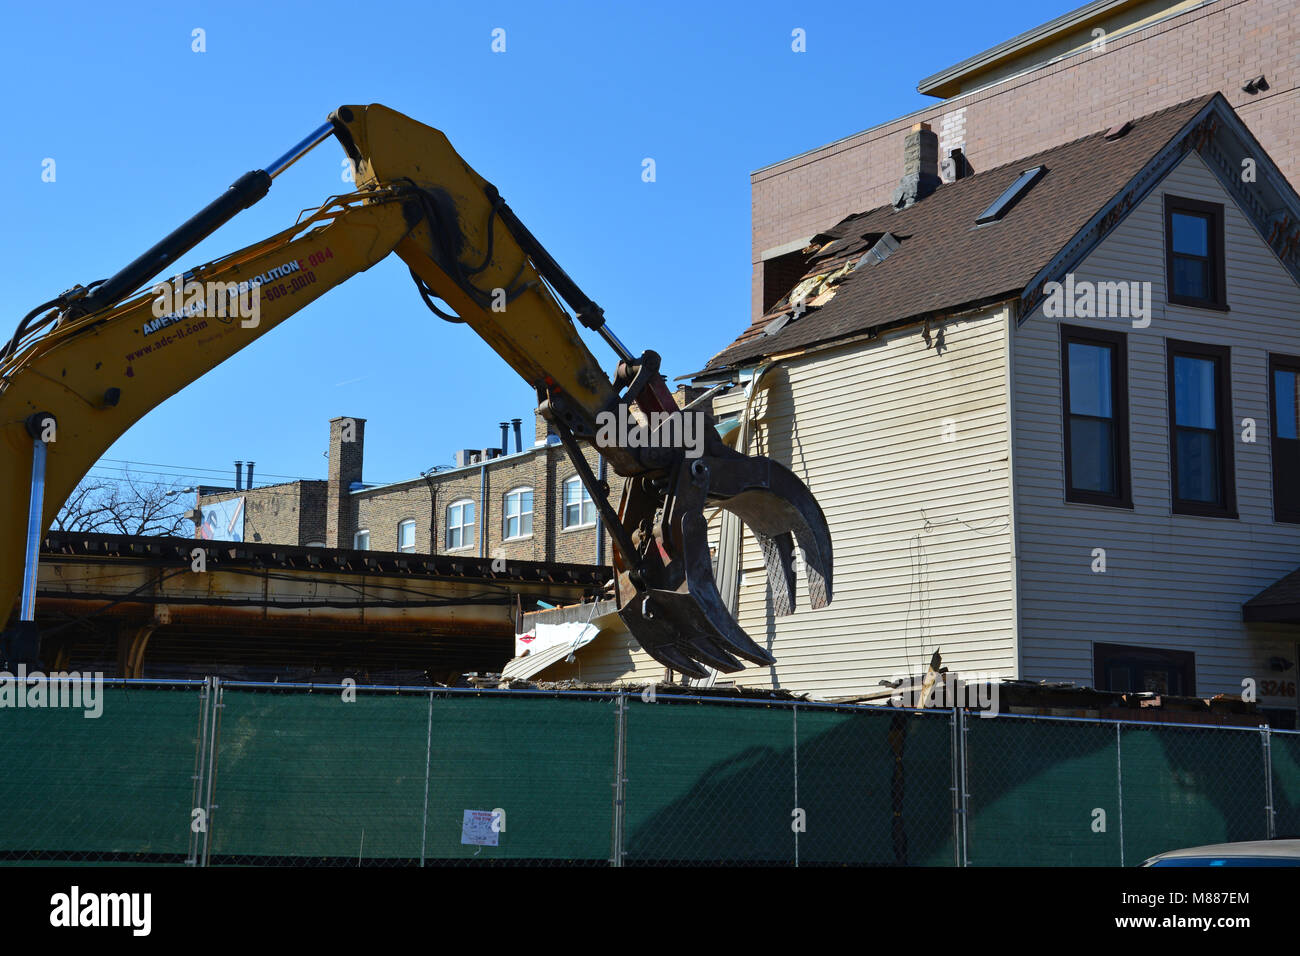 Chicago, Illinois, USA, 15 March 2018: Construction crews for the City of Chicago tear down a home north of the Belmont CTA Station. The city is demolishing 14 buildings at a cost of $320 million to make way for the Brown Line Flyover. The Flyover is controversial with residents of the Lakeview neighborhood who feel it is destroying the neighborhood and creating permanent scars. Once completed in 2024 the flyover is expected to reduce commute times by 4:00 and add capacity to the Red, Purple and Brown Lines. Credit: D Guest Smith/Alamy Live News Stock Photo